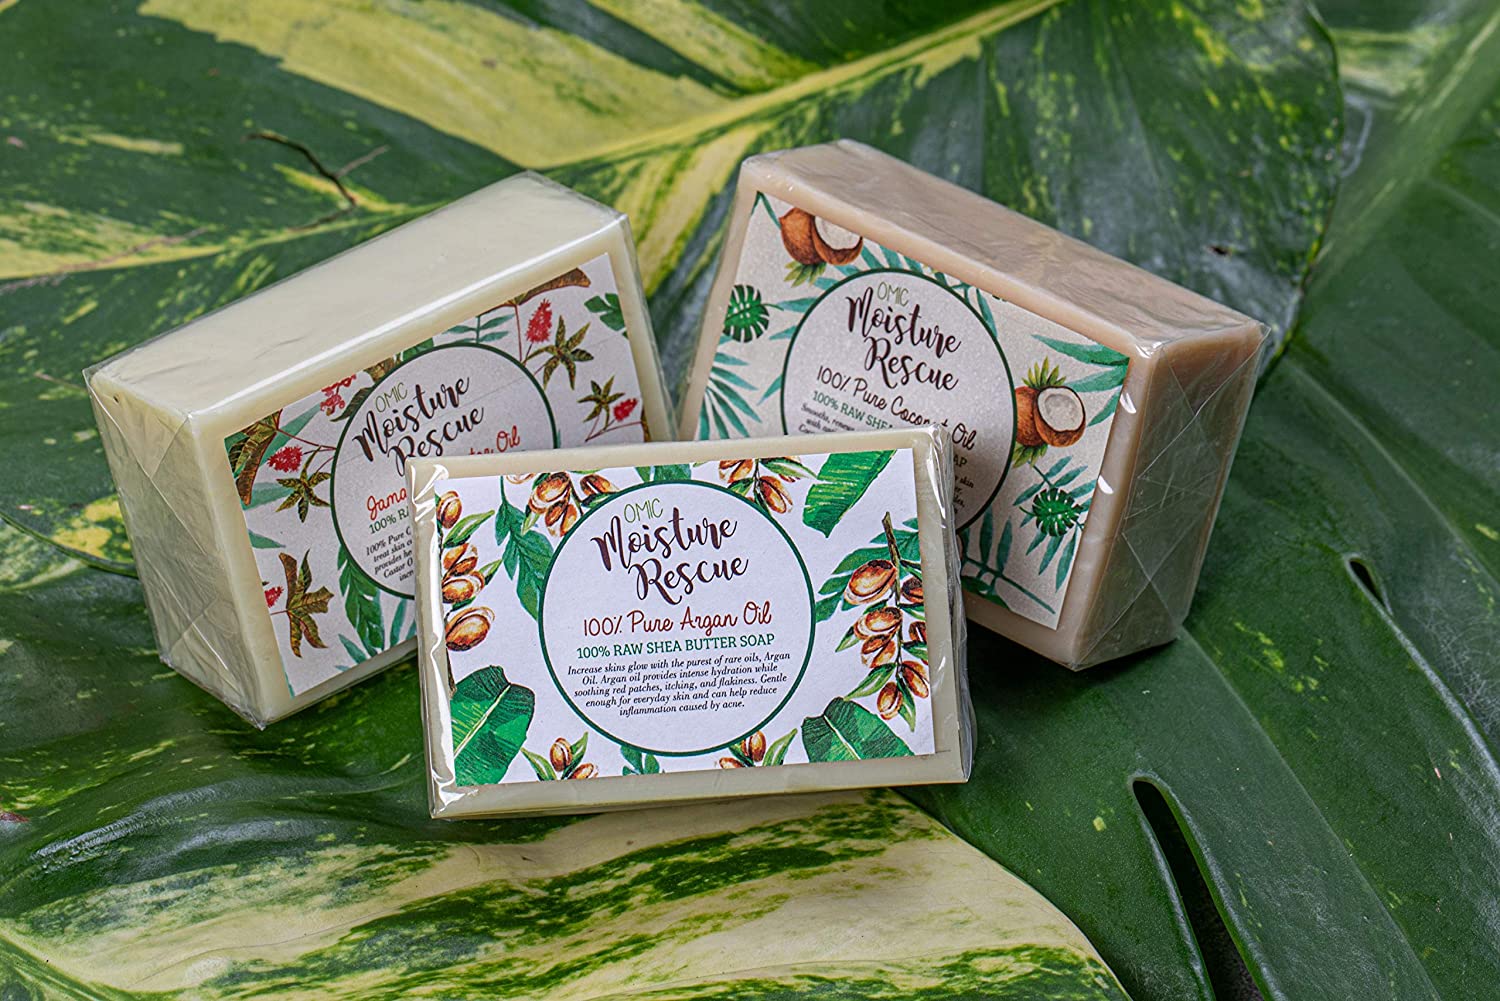 BOGO Moisture Rescue Shea Butter Soap with Jamaican Castor Oil Omic Moisture Rescue - Mitchell Brands - Skin Lightening, Skin Brightening, Fade Dark Spots, Shea Butter, Hair Growth Products